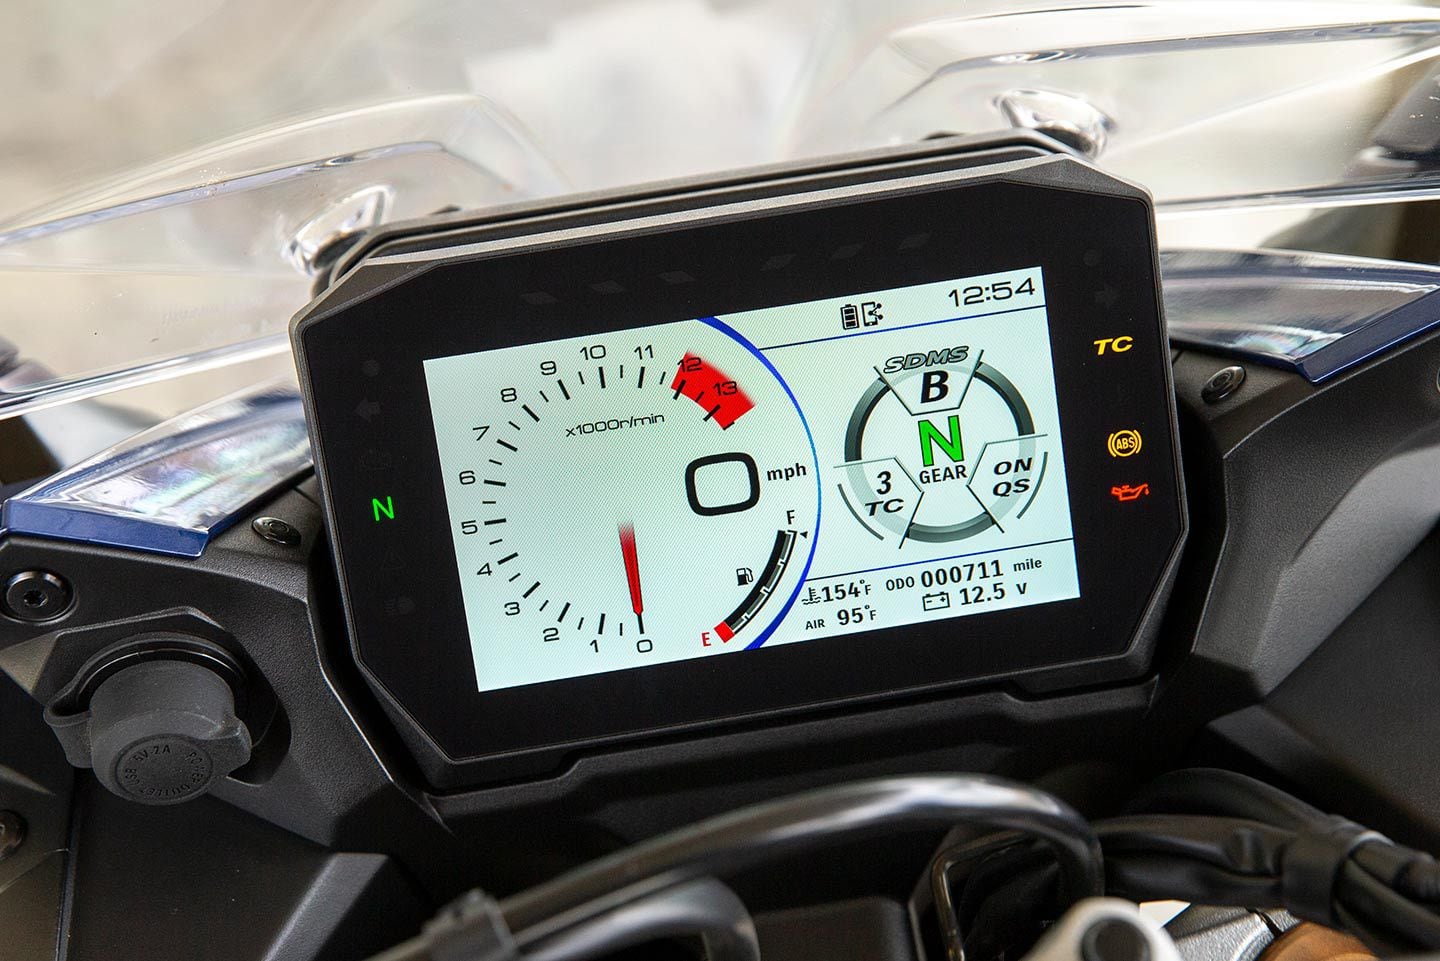 The 6.5-inch TFT display is superior to LCD displays in that it makes it far easier to change ride modes and settings.